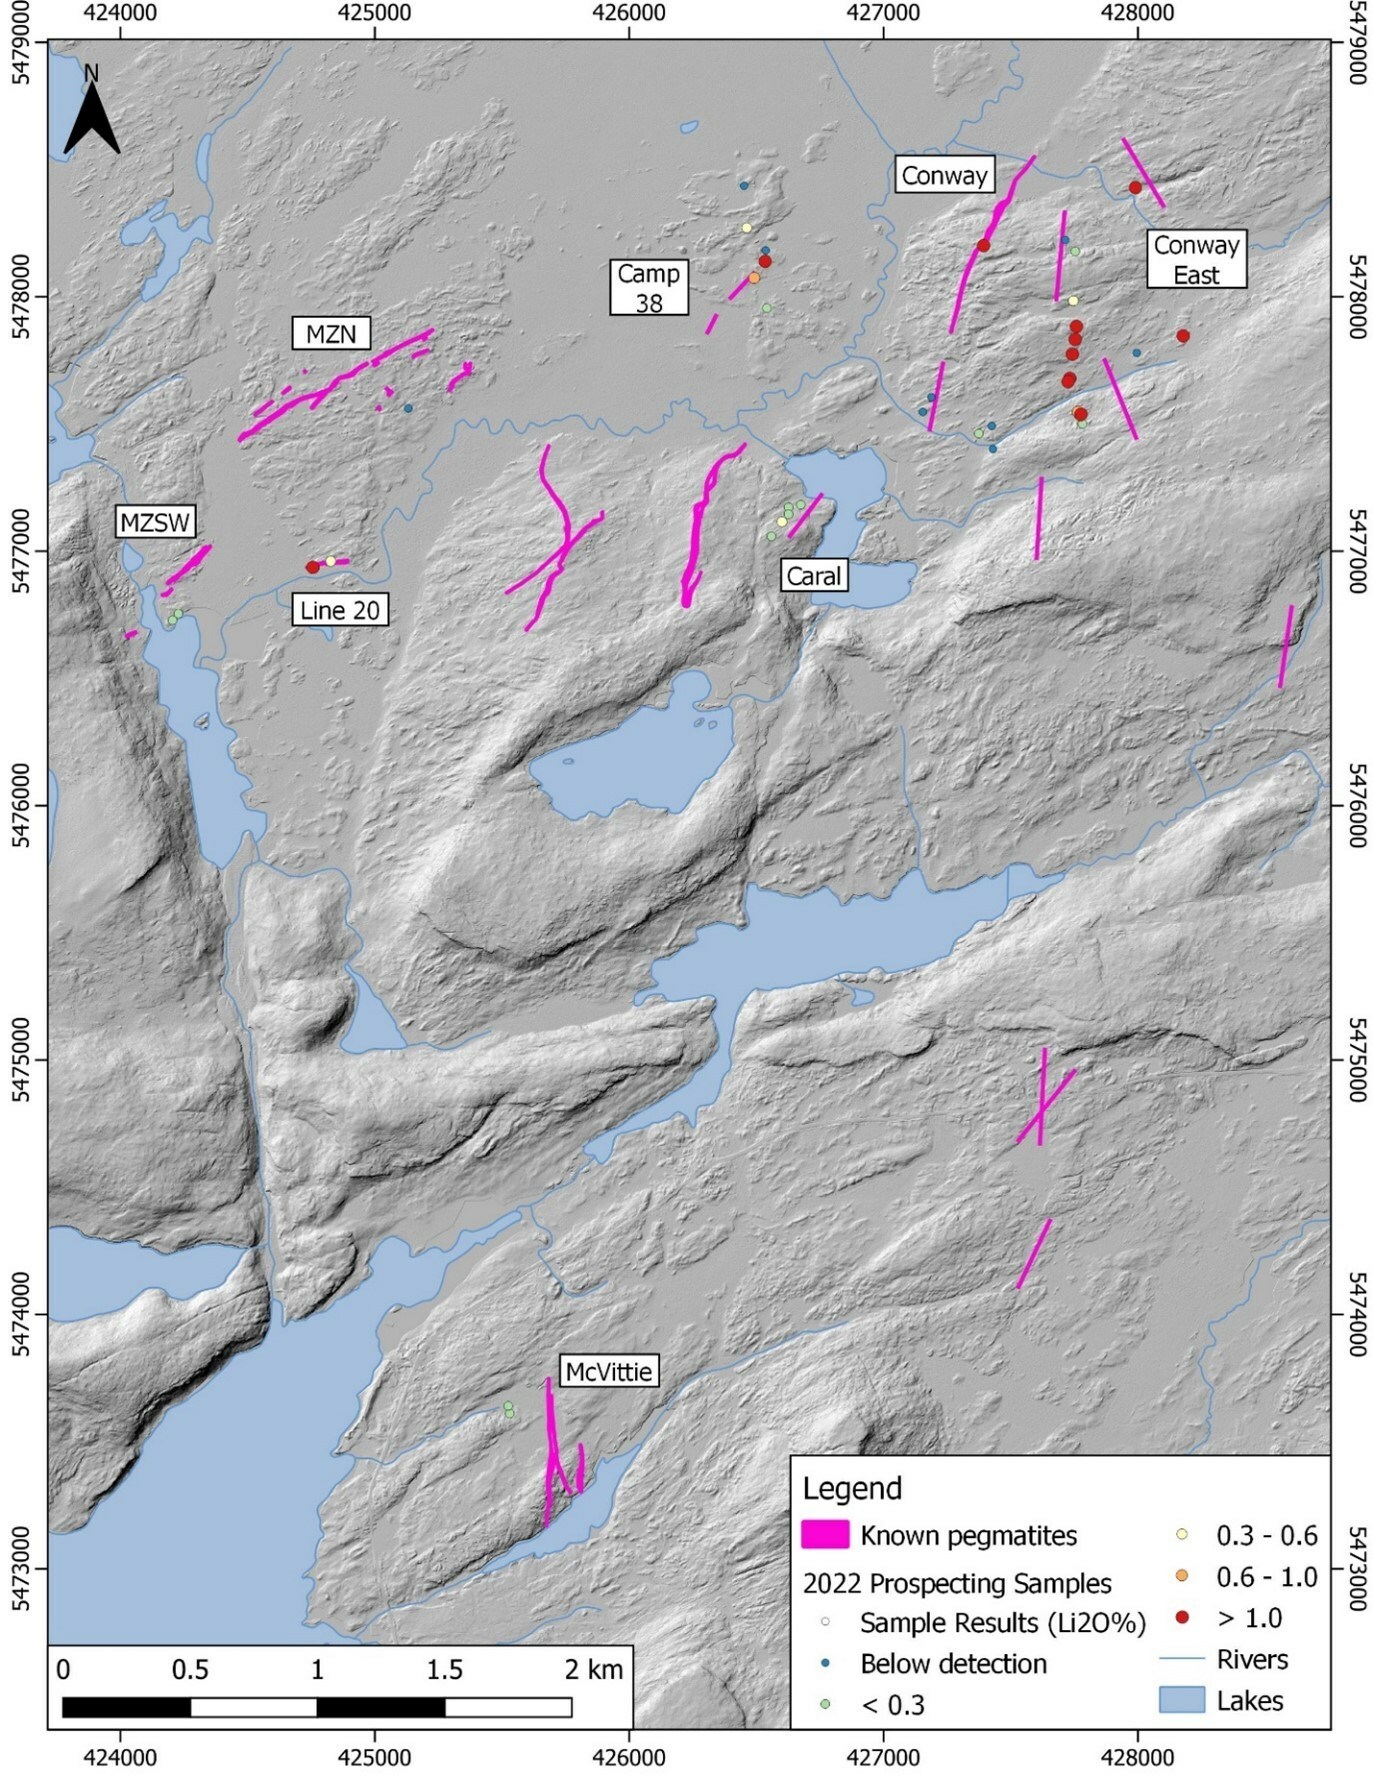 FIGURE 1 | Map showing location of northern spodumene-bearing deposits and prospects.  Rock Tech’s 2023 winter drilling programme focused on the MZN and McVittie prospects. Summer field exploration will focus on positive sample results from the 2022 field program. (CNW Group/Rock Tech Lithium Inc.)